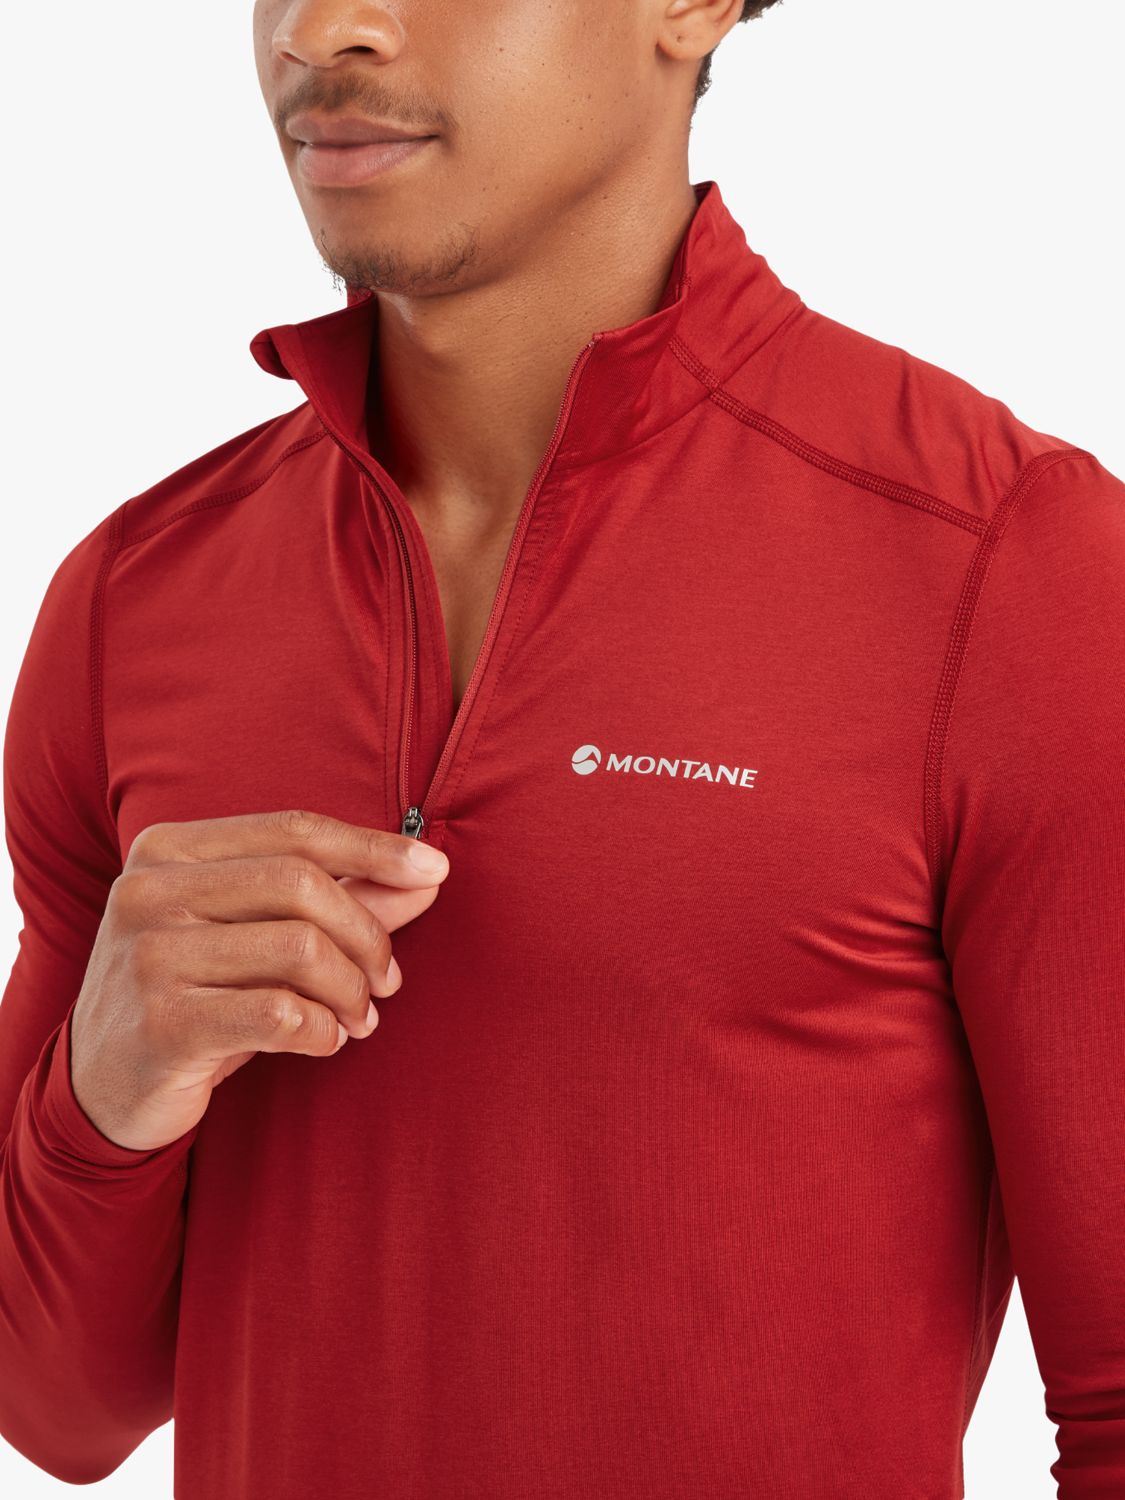 Montane Dart XT Thermal Zip Neck Long Sleeved Top, Acer Red, S